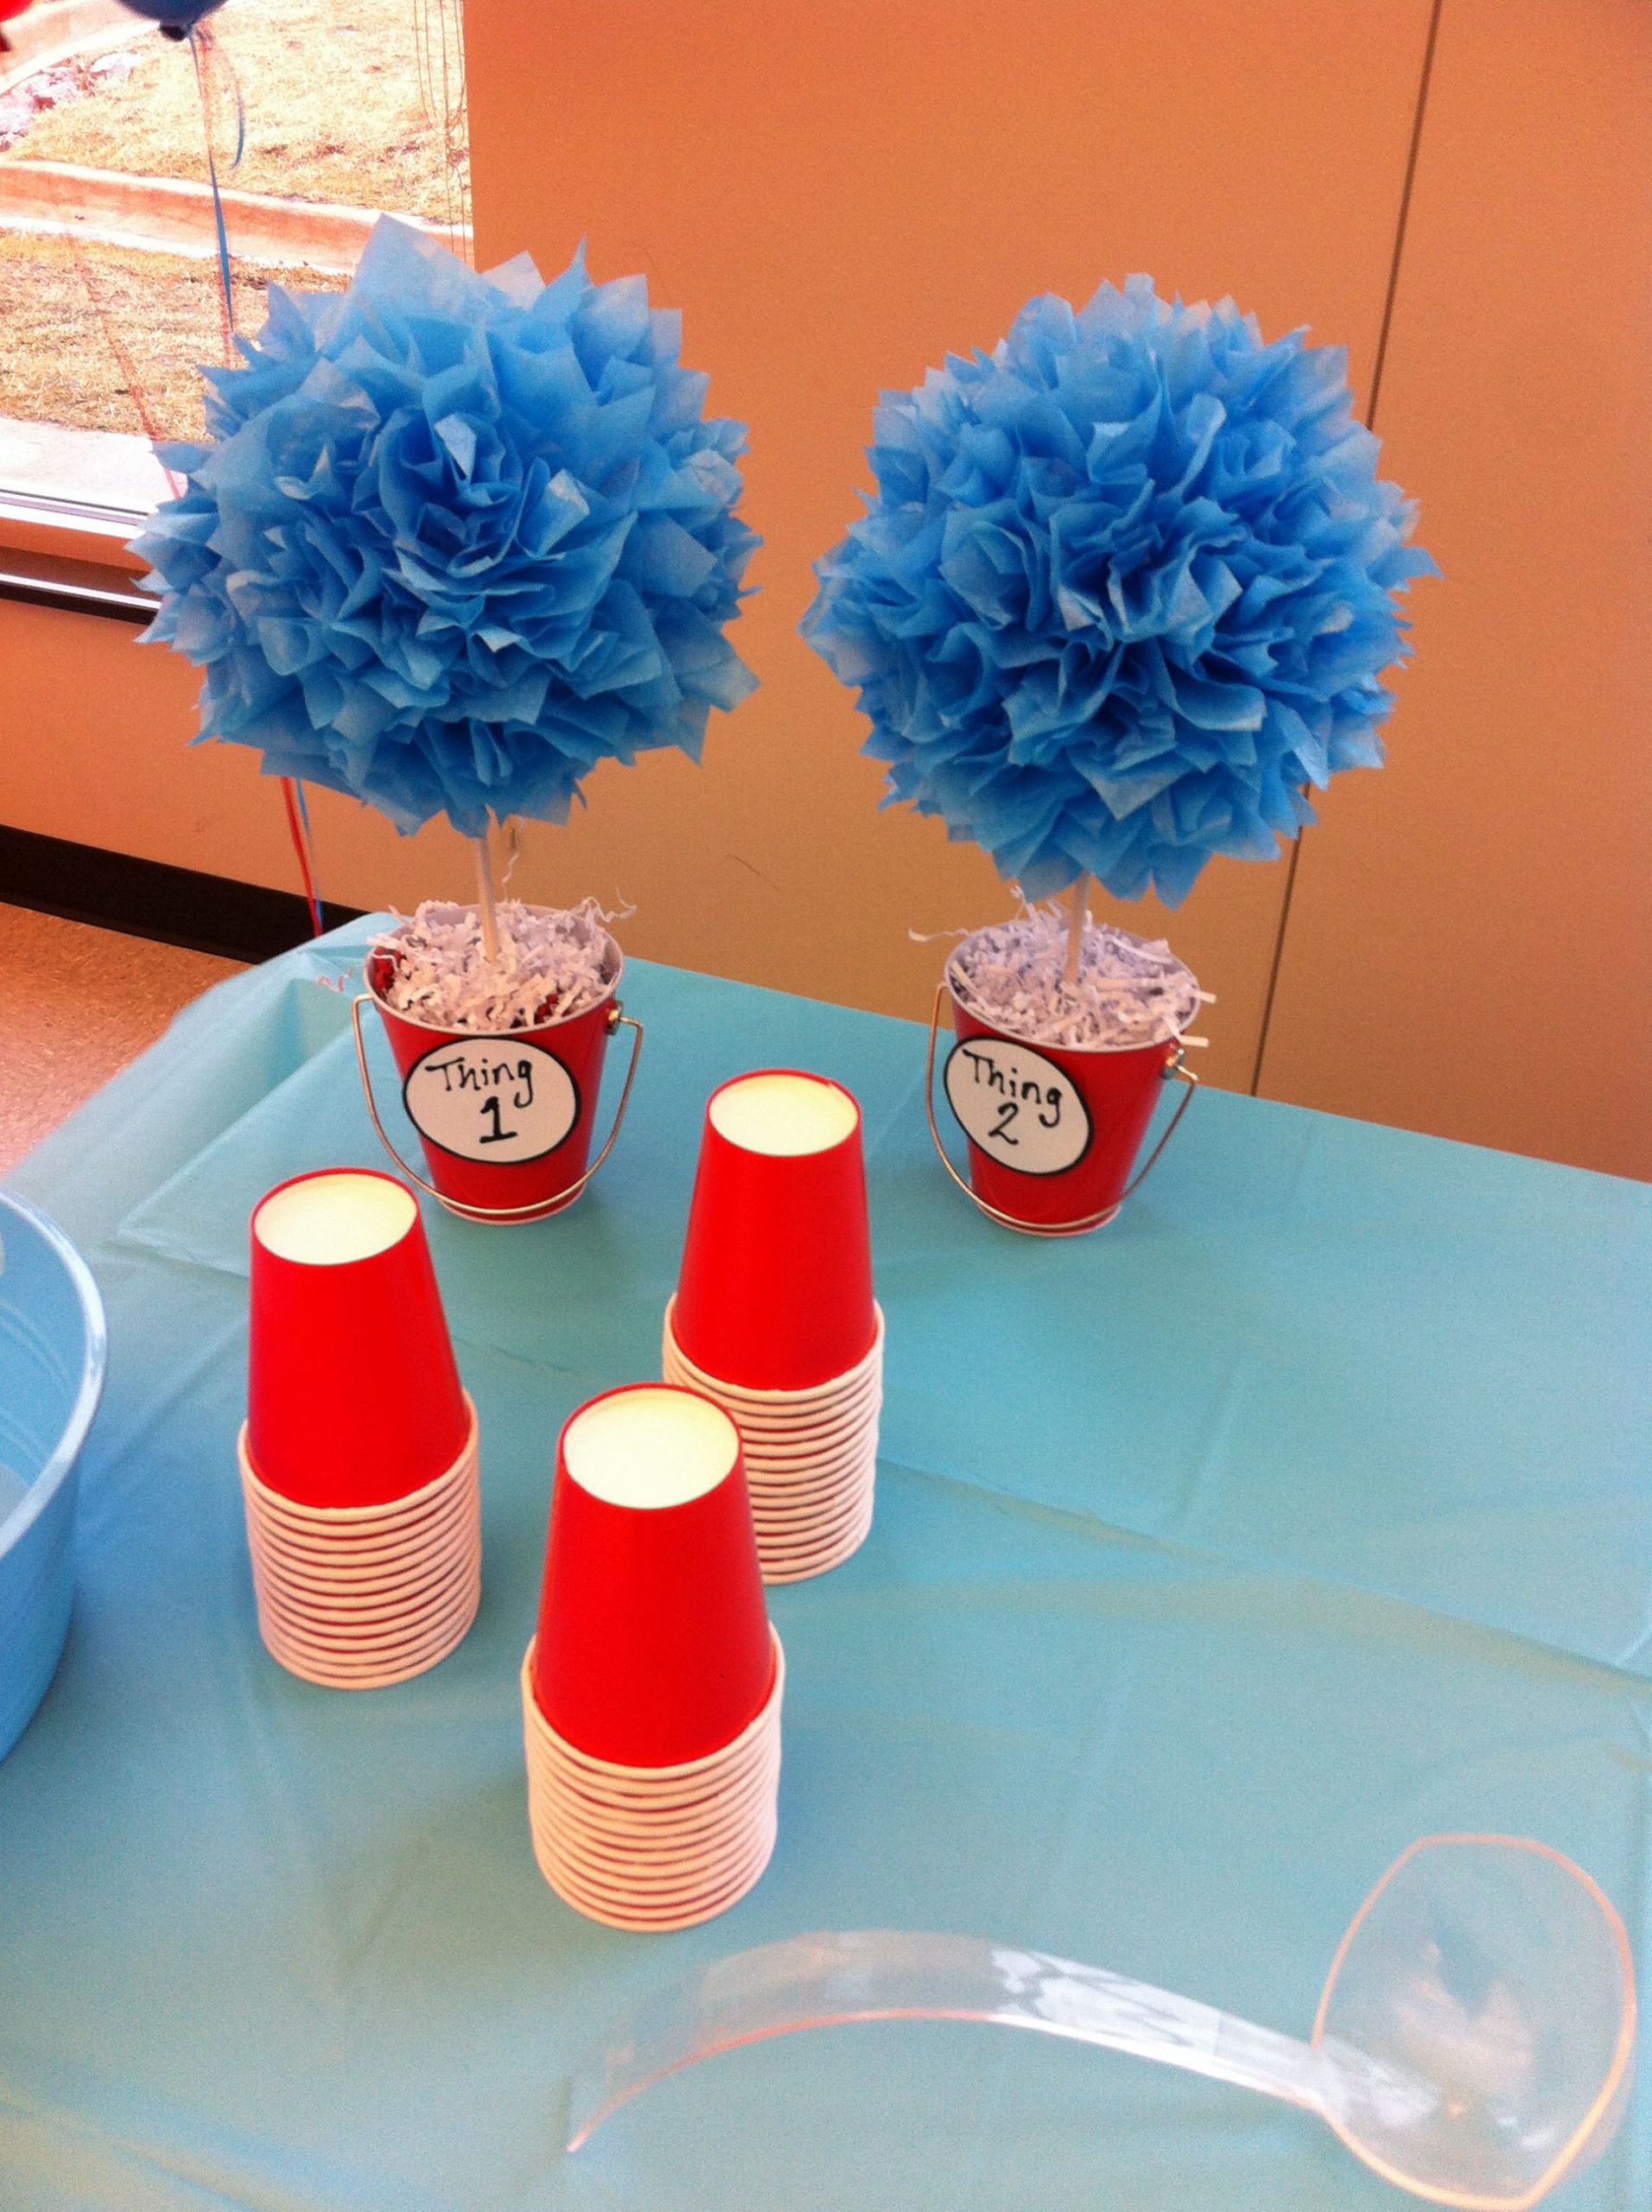 Twin Baby Shower Decoration Ideas
 Thing one and thing two twin baby shower theme Decoration